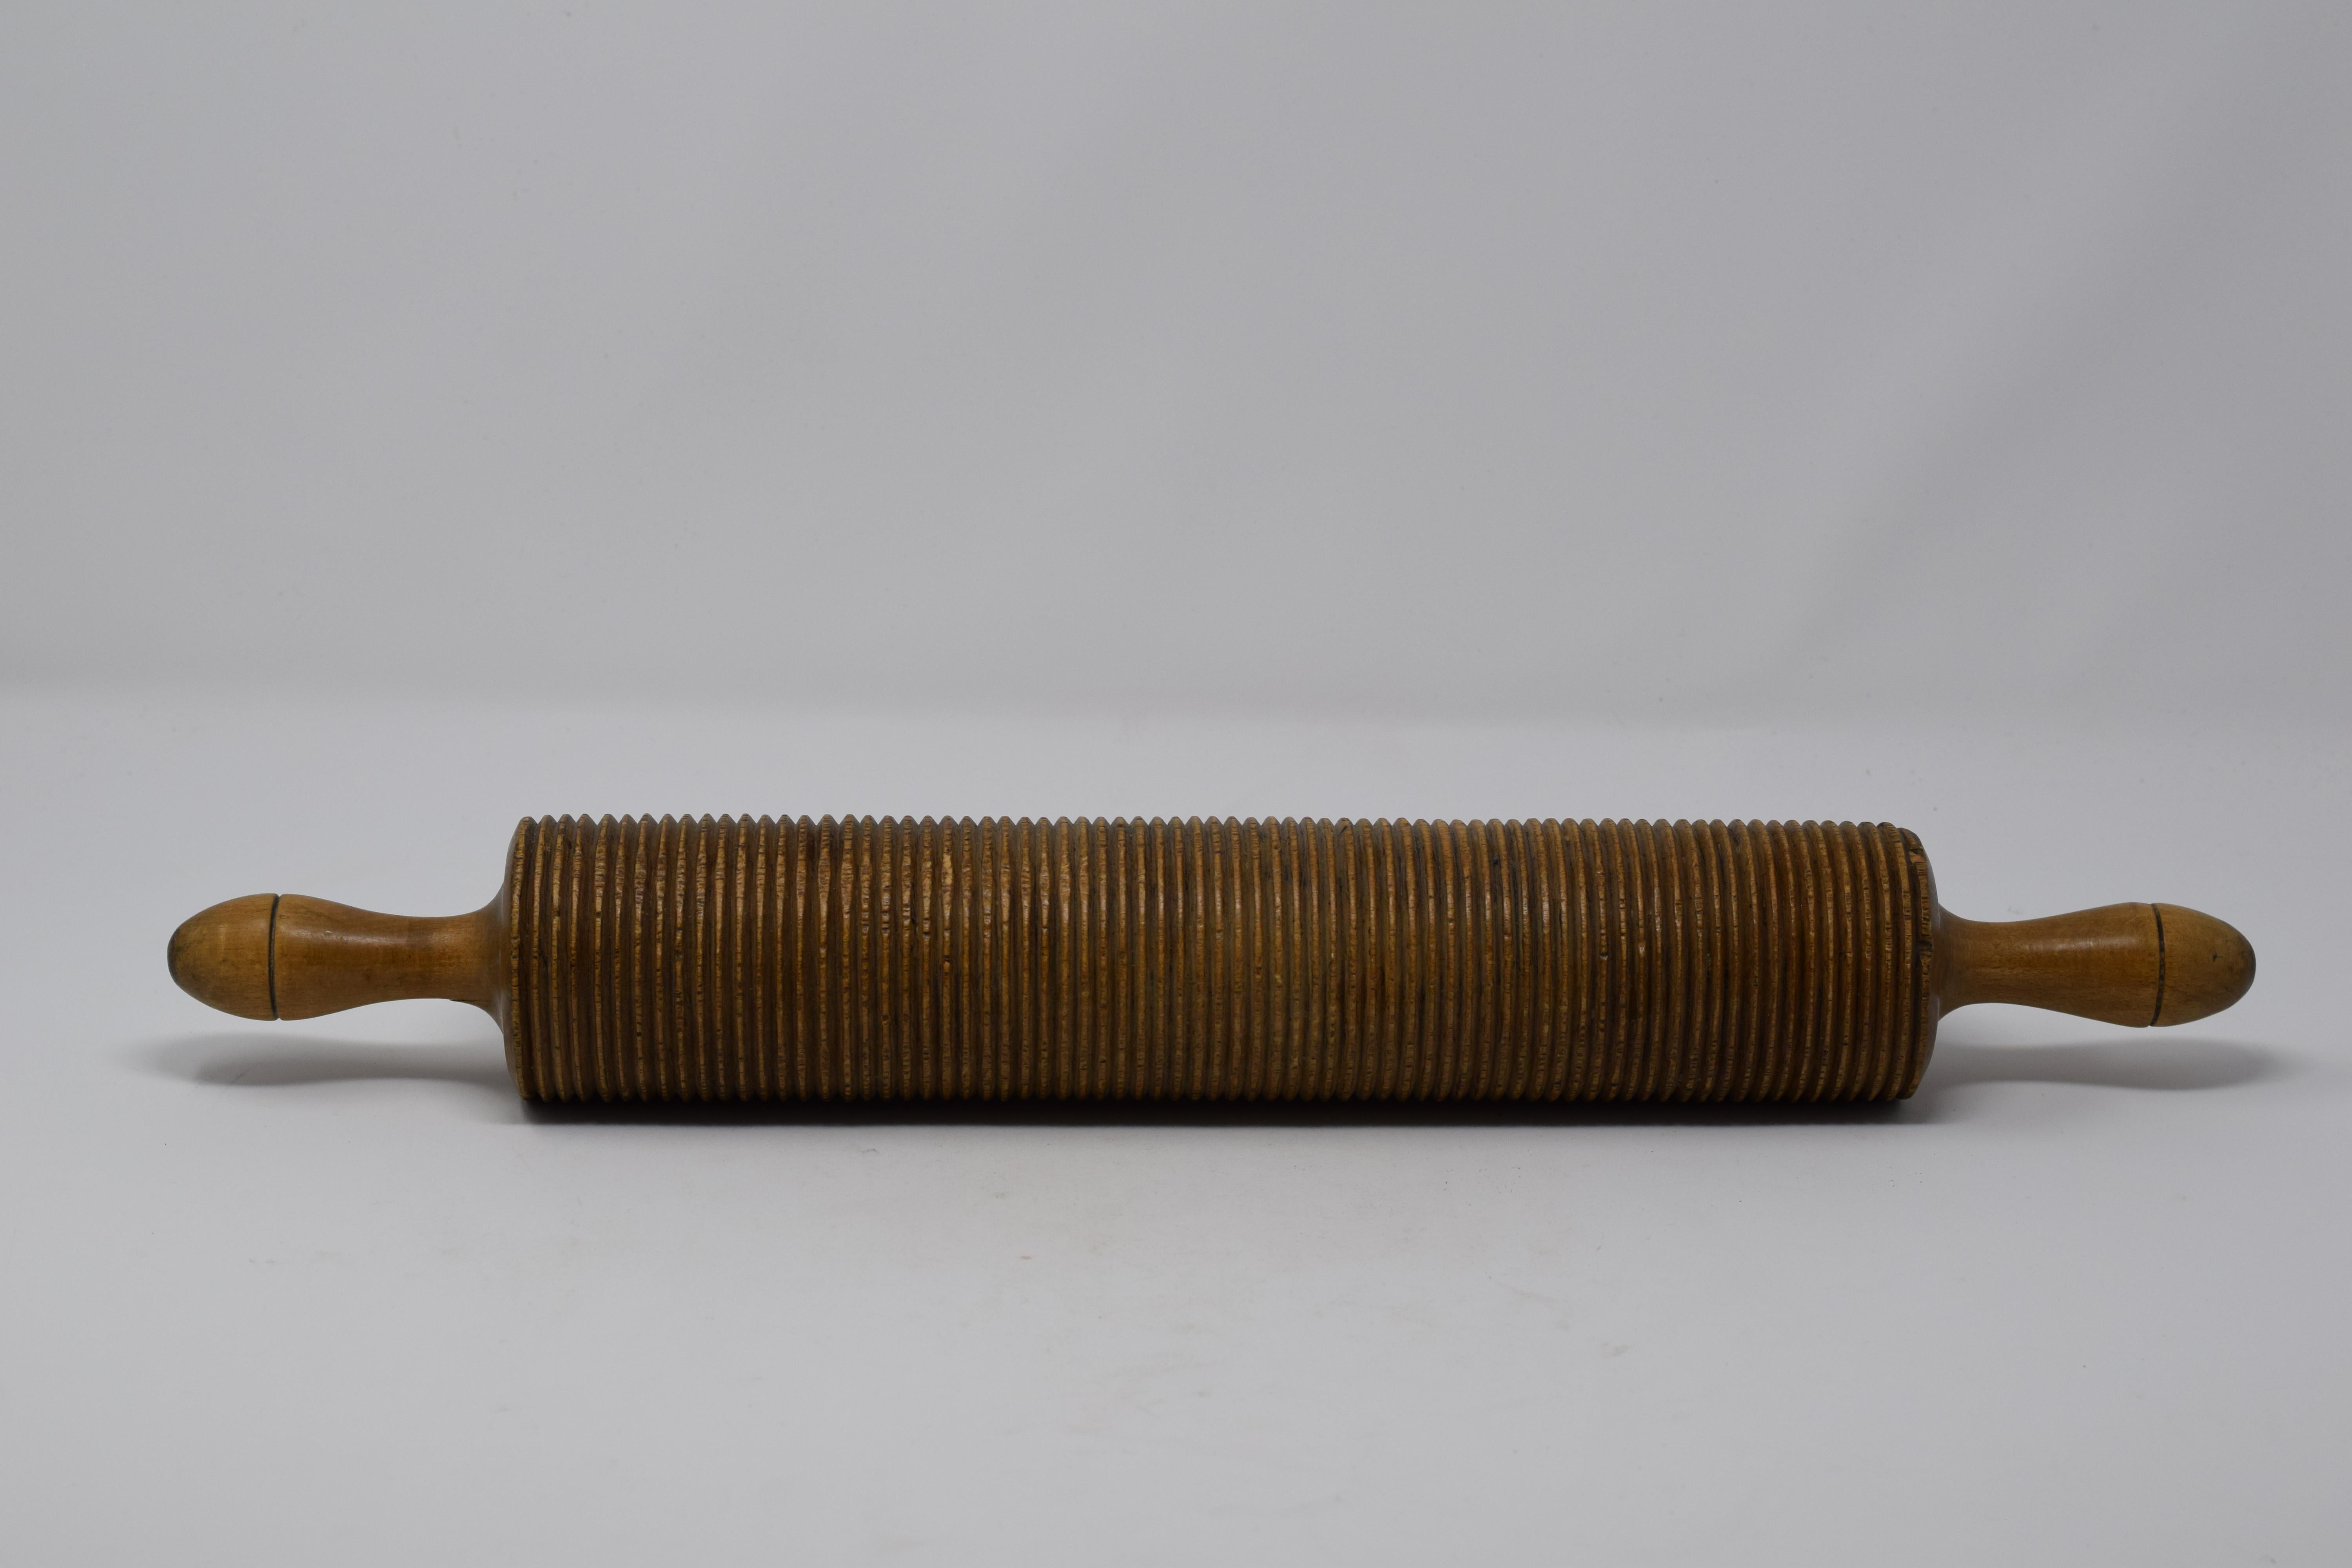 This vintage rolling pin has horizontal ridges and was likely used to make thin spaghetti noodles. The wood pin is in good condition and has a nice worn patina.